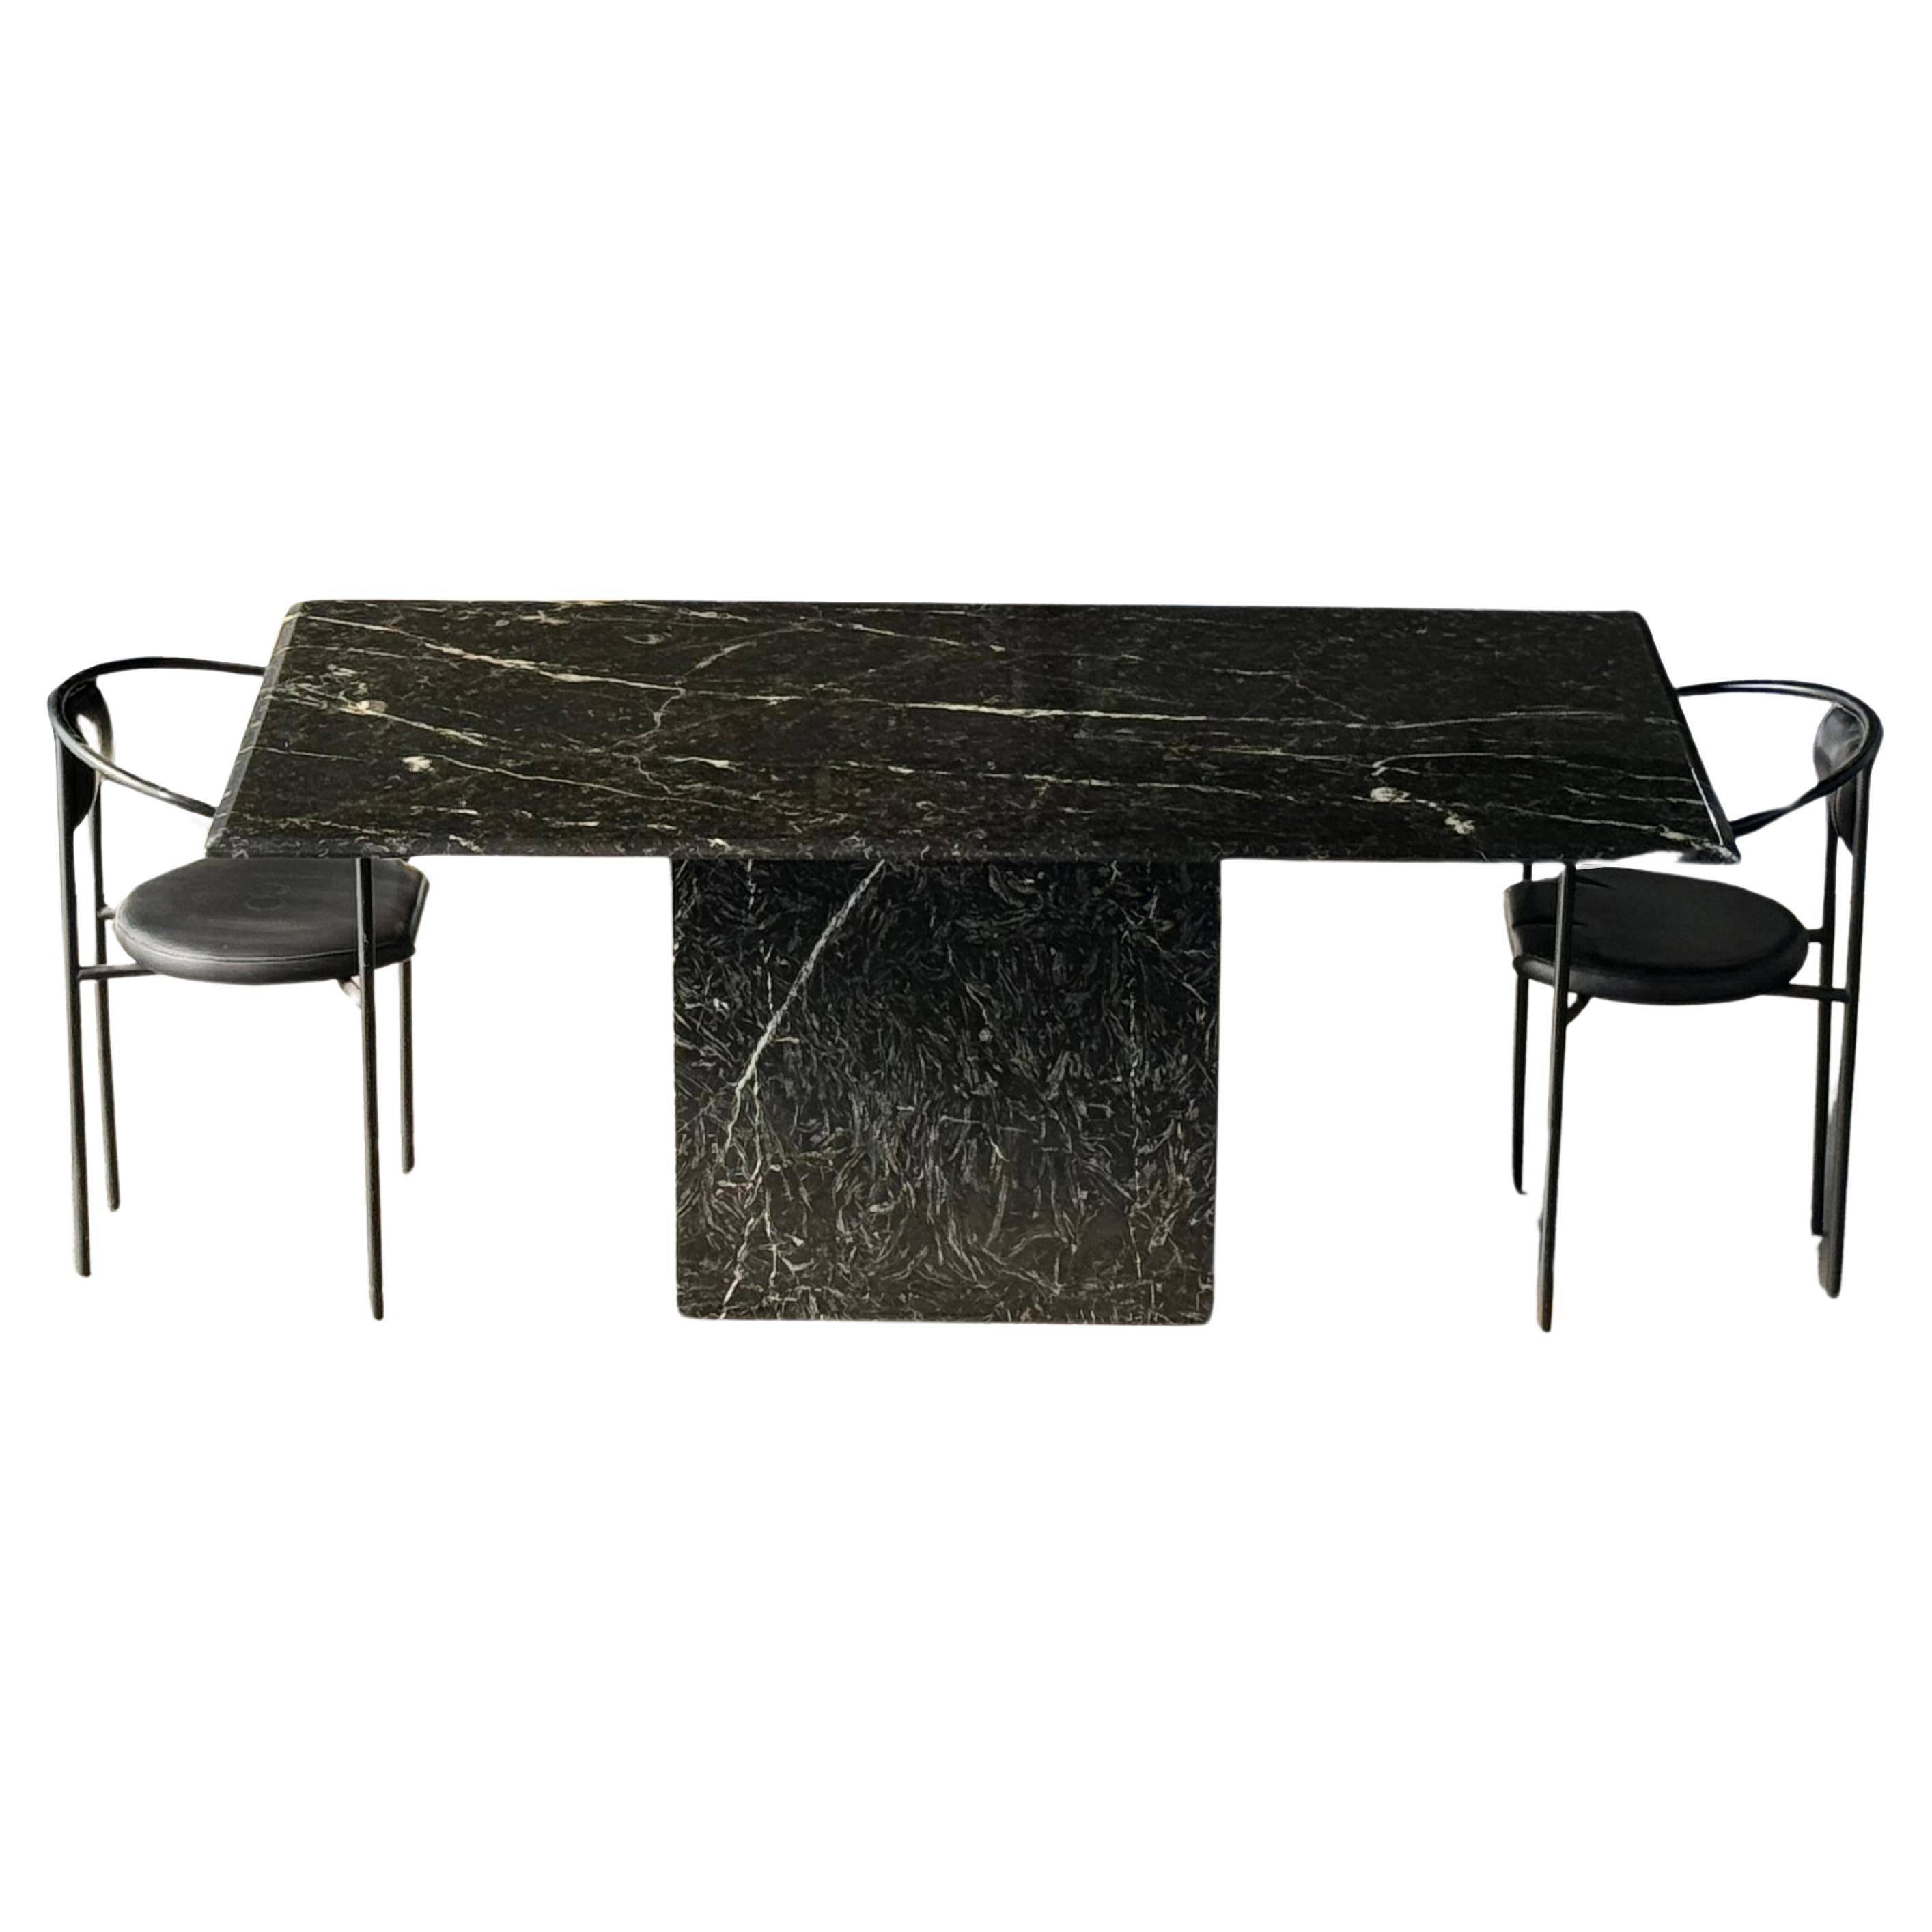 Vintage Petite Dining Table in Black Nero Marquina Marble